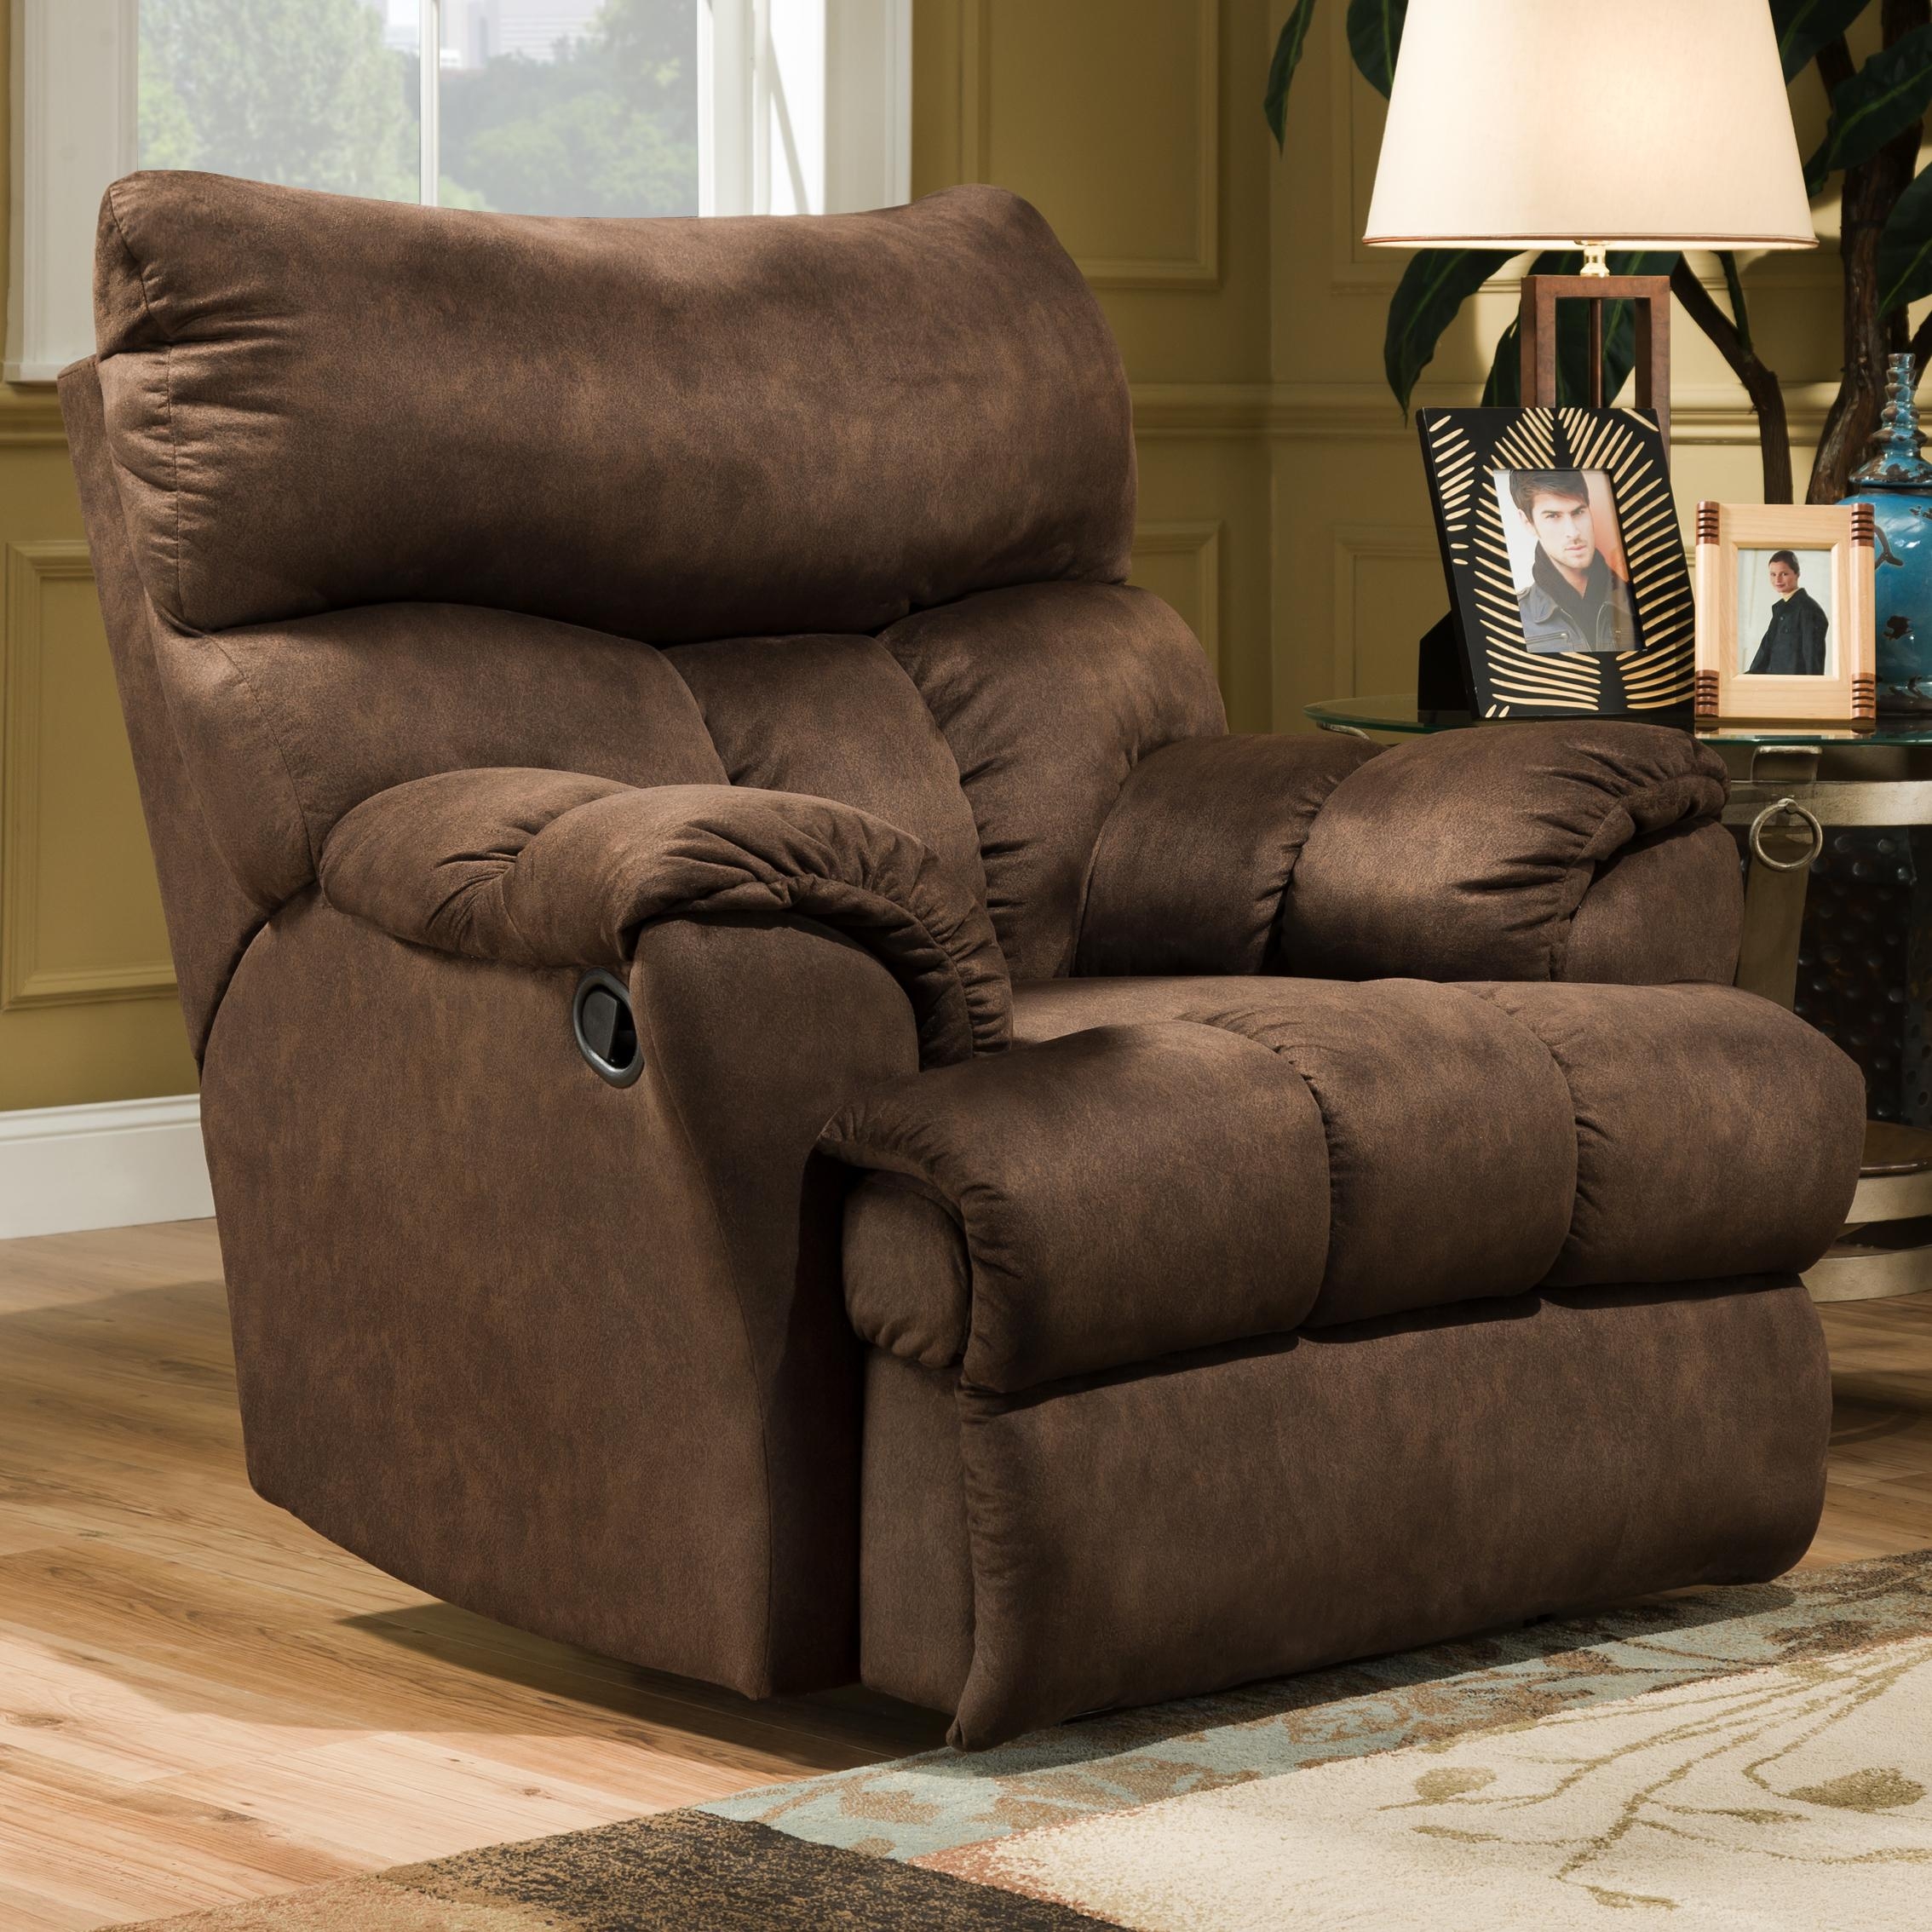 Most Comfortable Recliners Visualhunt, Most Comfortable Leather Recliner